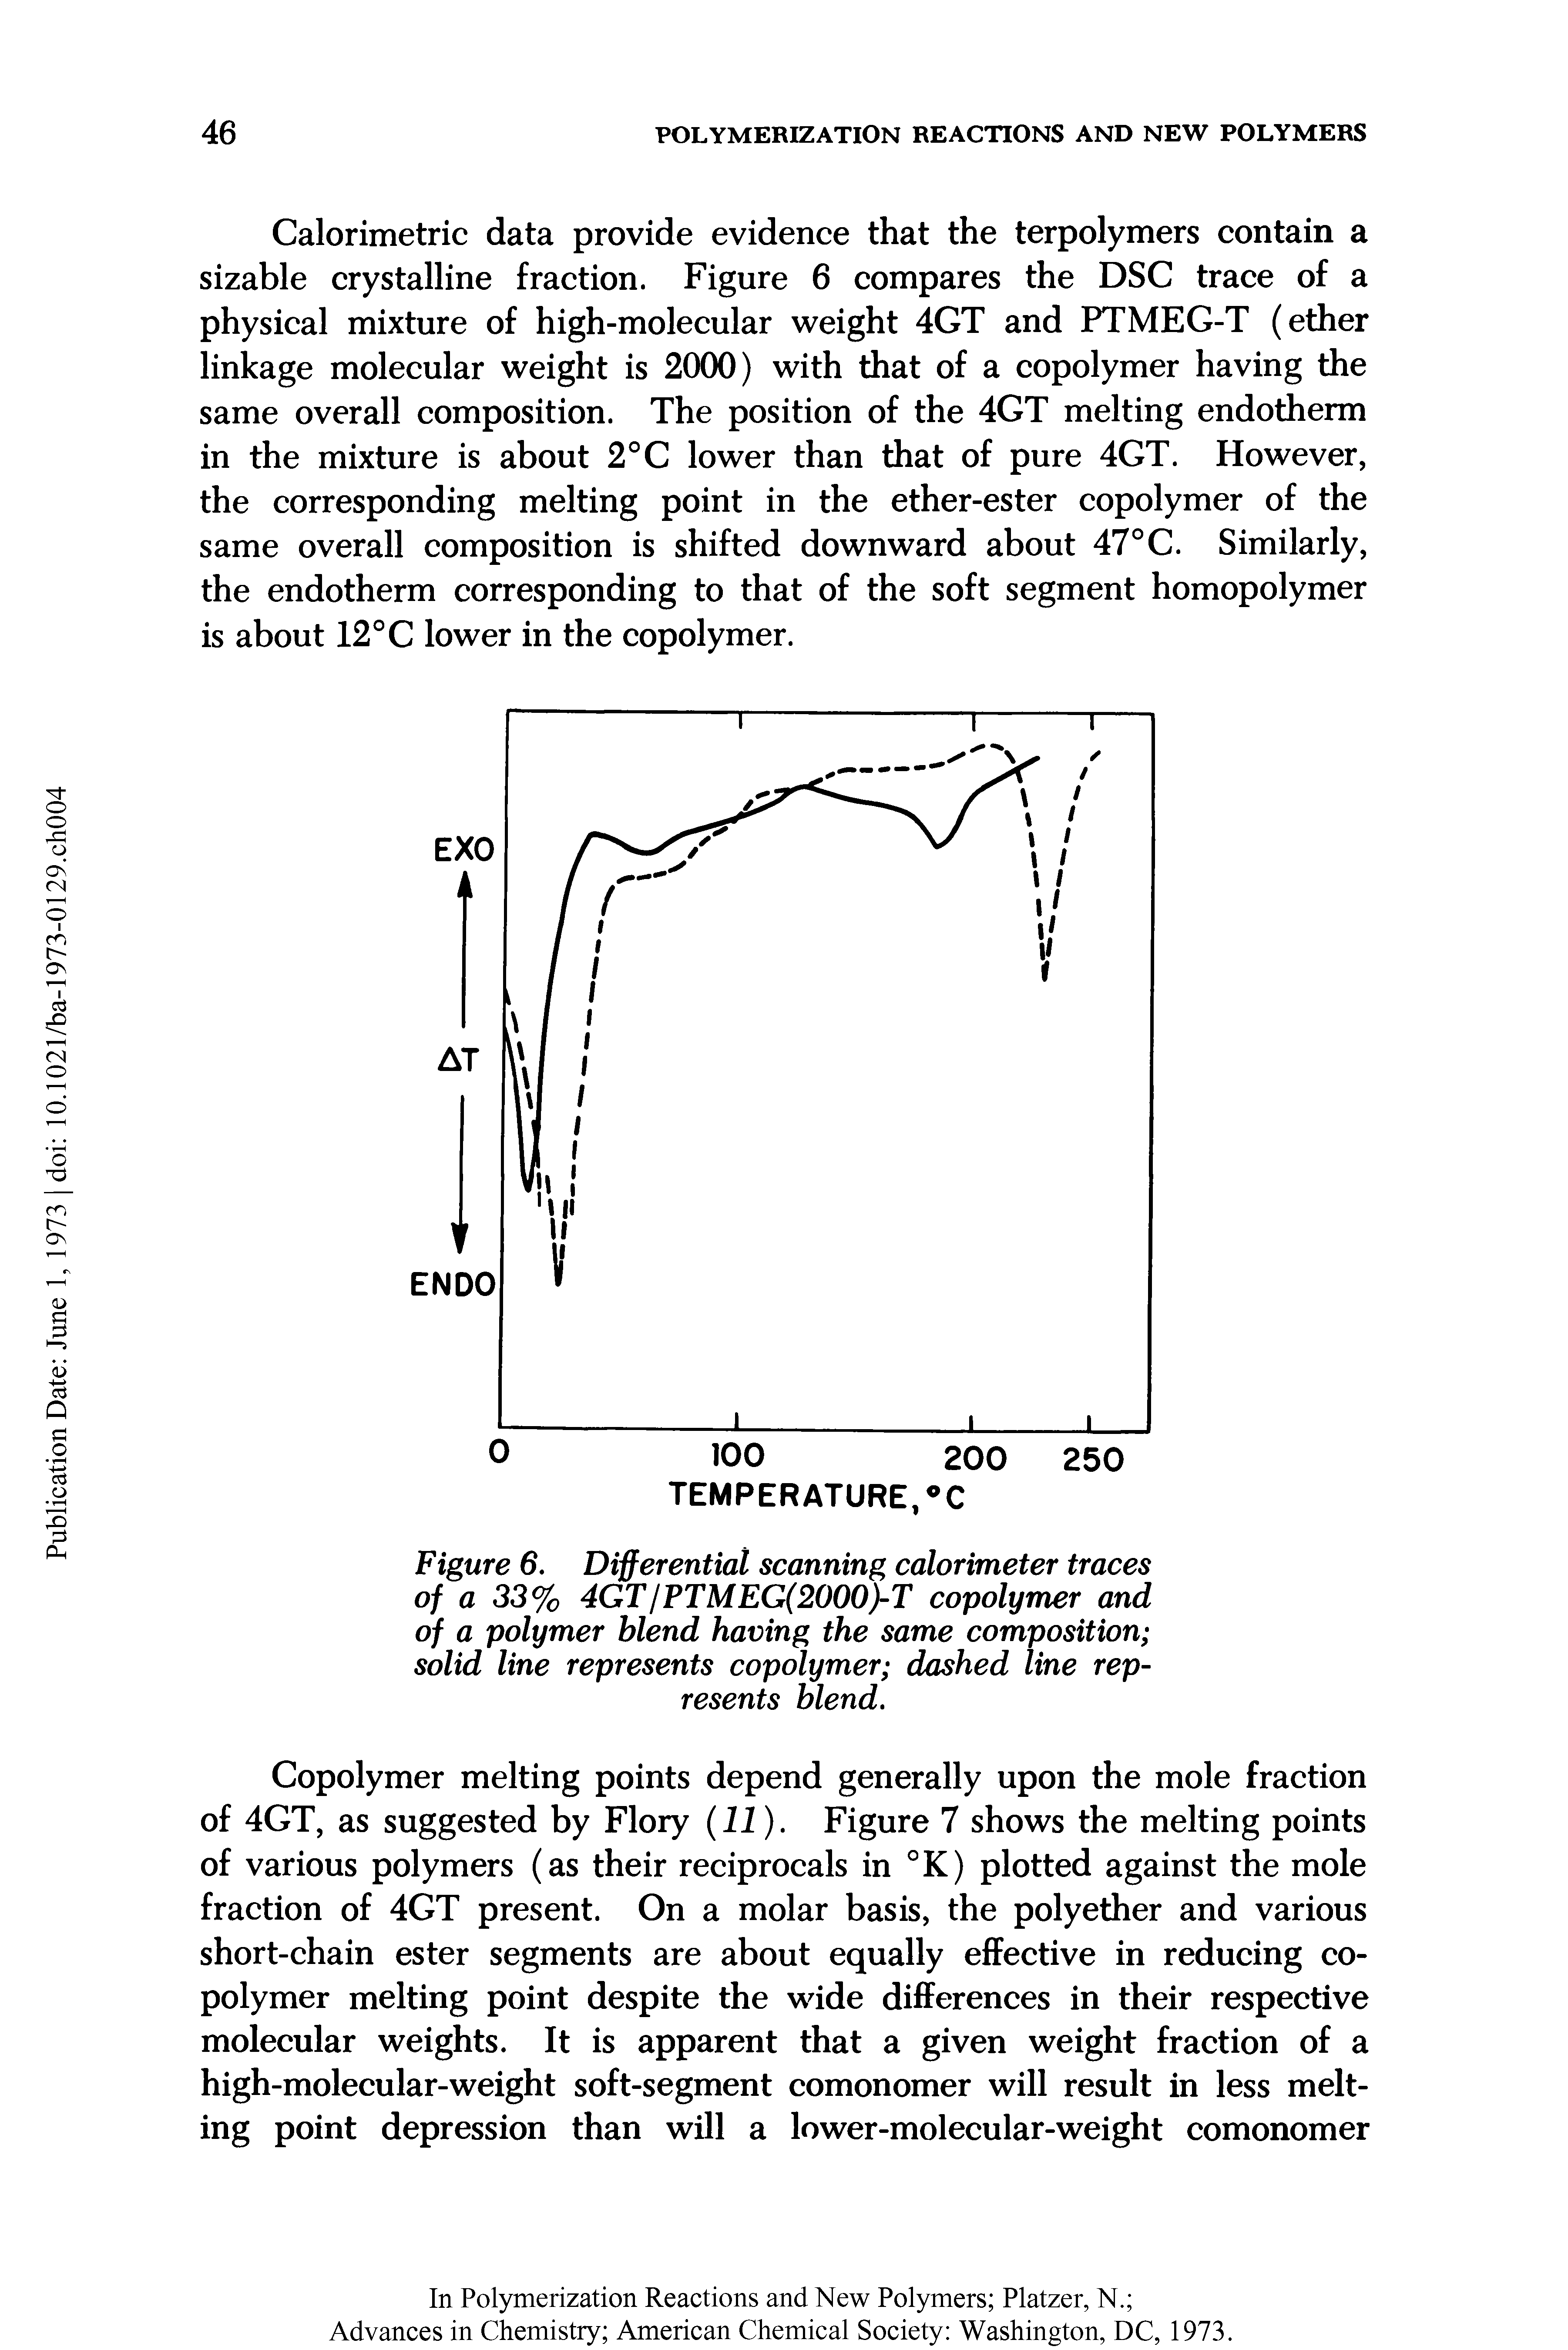 Figure 6. Differential scanning calorimeter traces of a 33% 4GT/PTMEG(2000)-T copolymer and of a polymer blend having the same composition solid line represents copolymer dashed line represents blend.